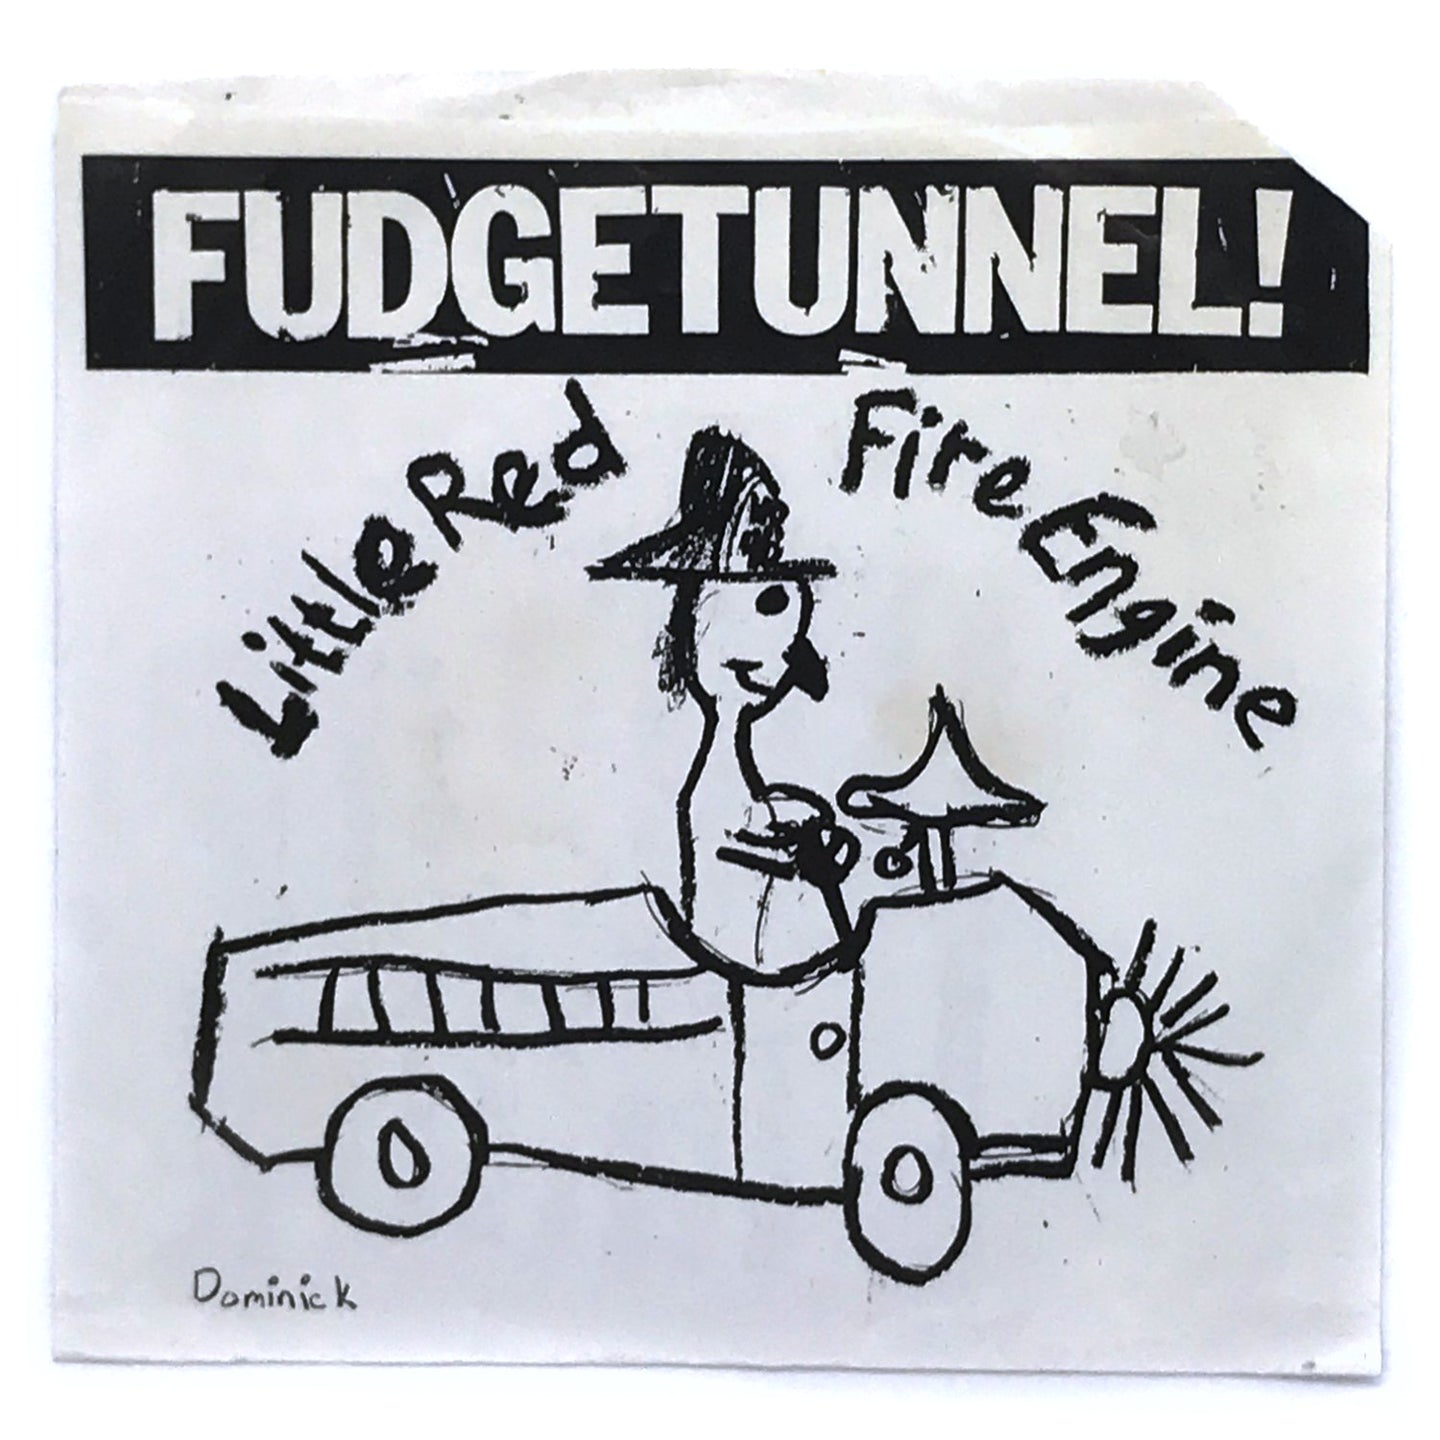 Fudgetunnel! : LITTLE RED FIRE ENGINE/ BEATING (IS A LUXURY)